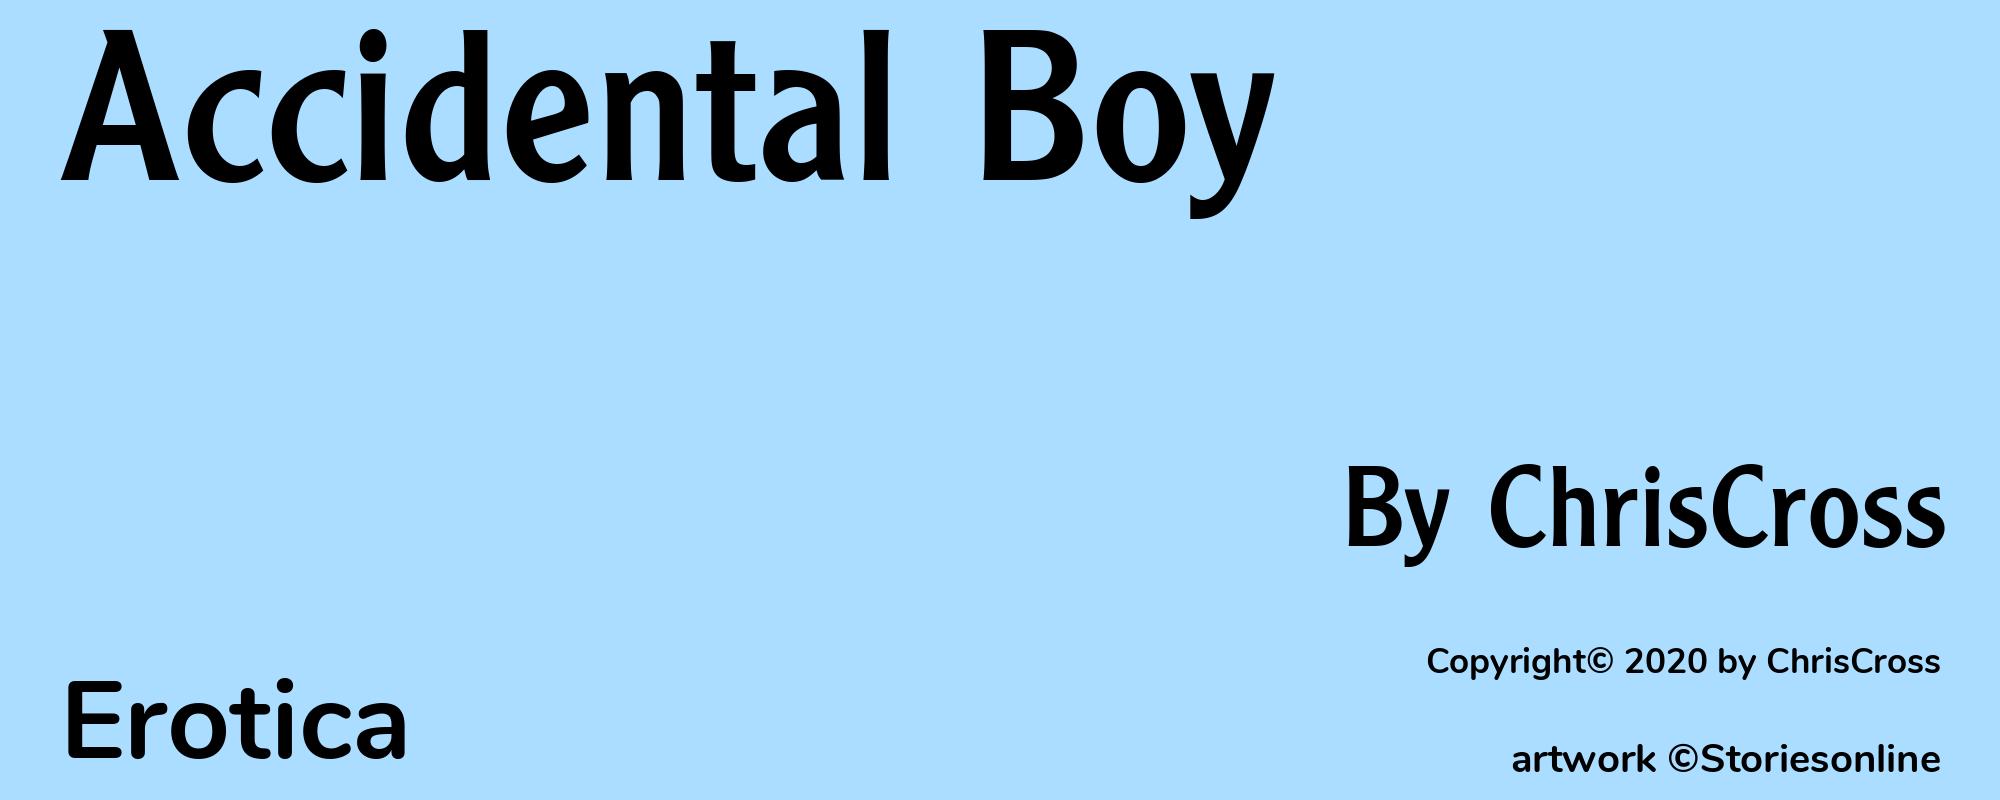 Accidental Boy - Cover